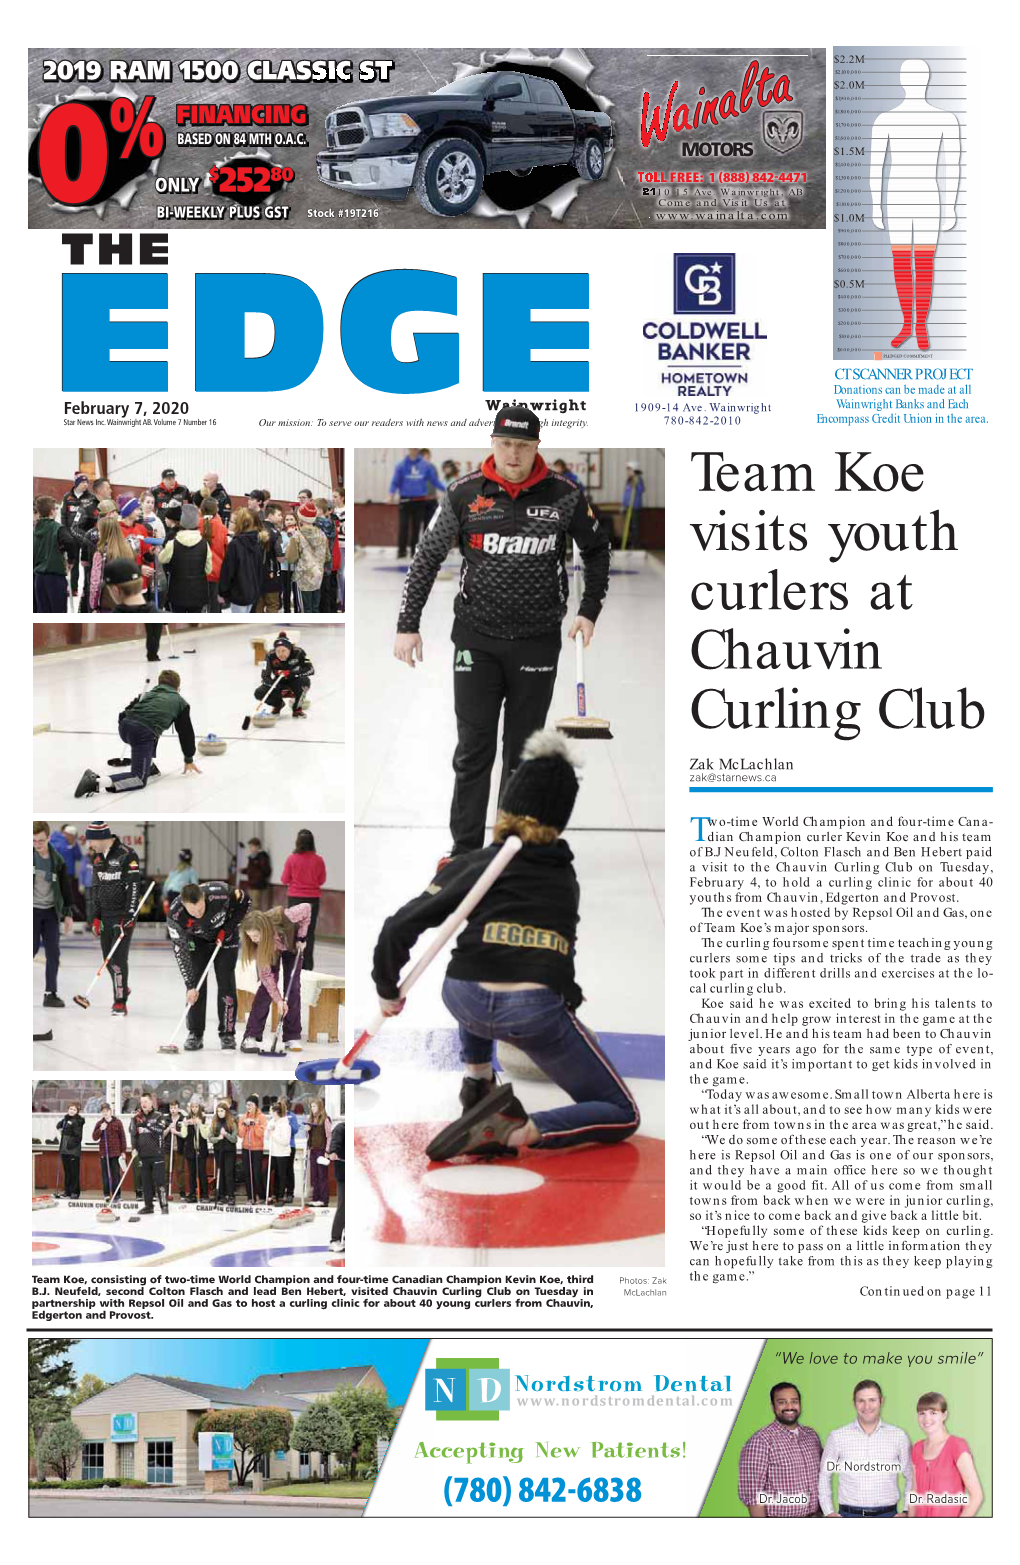 Team Koe Visits Youth Curlers at Chauvin Curling Club